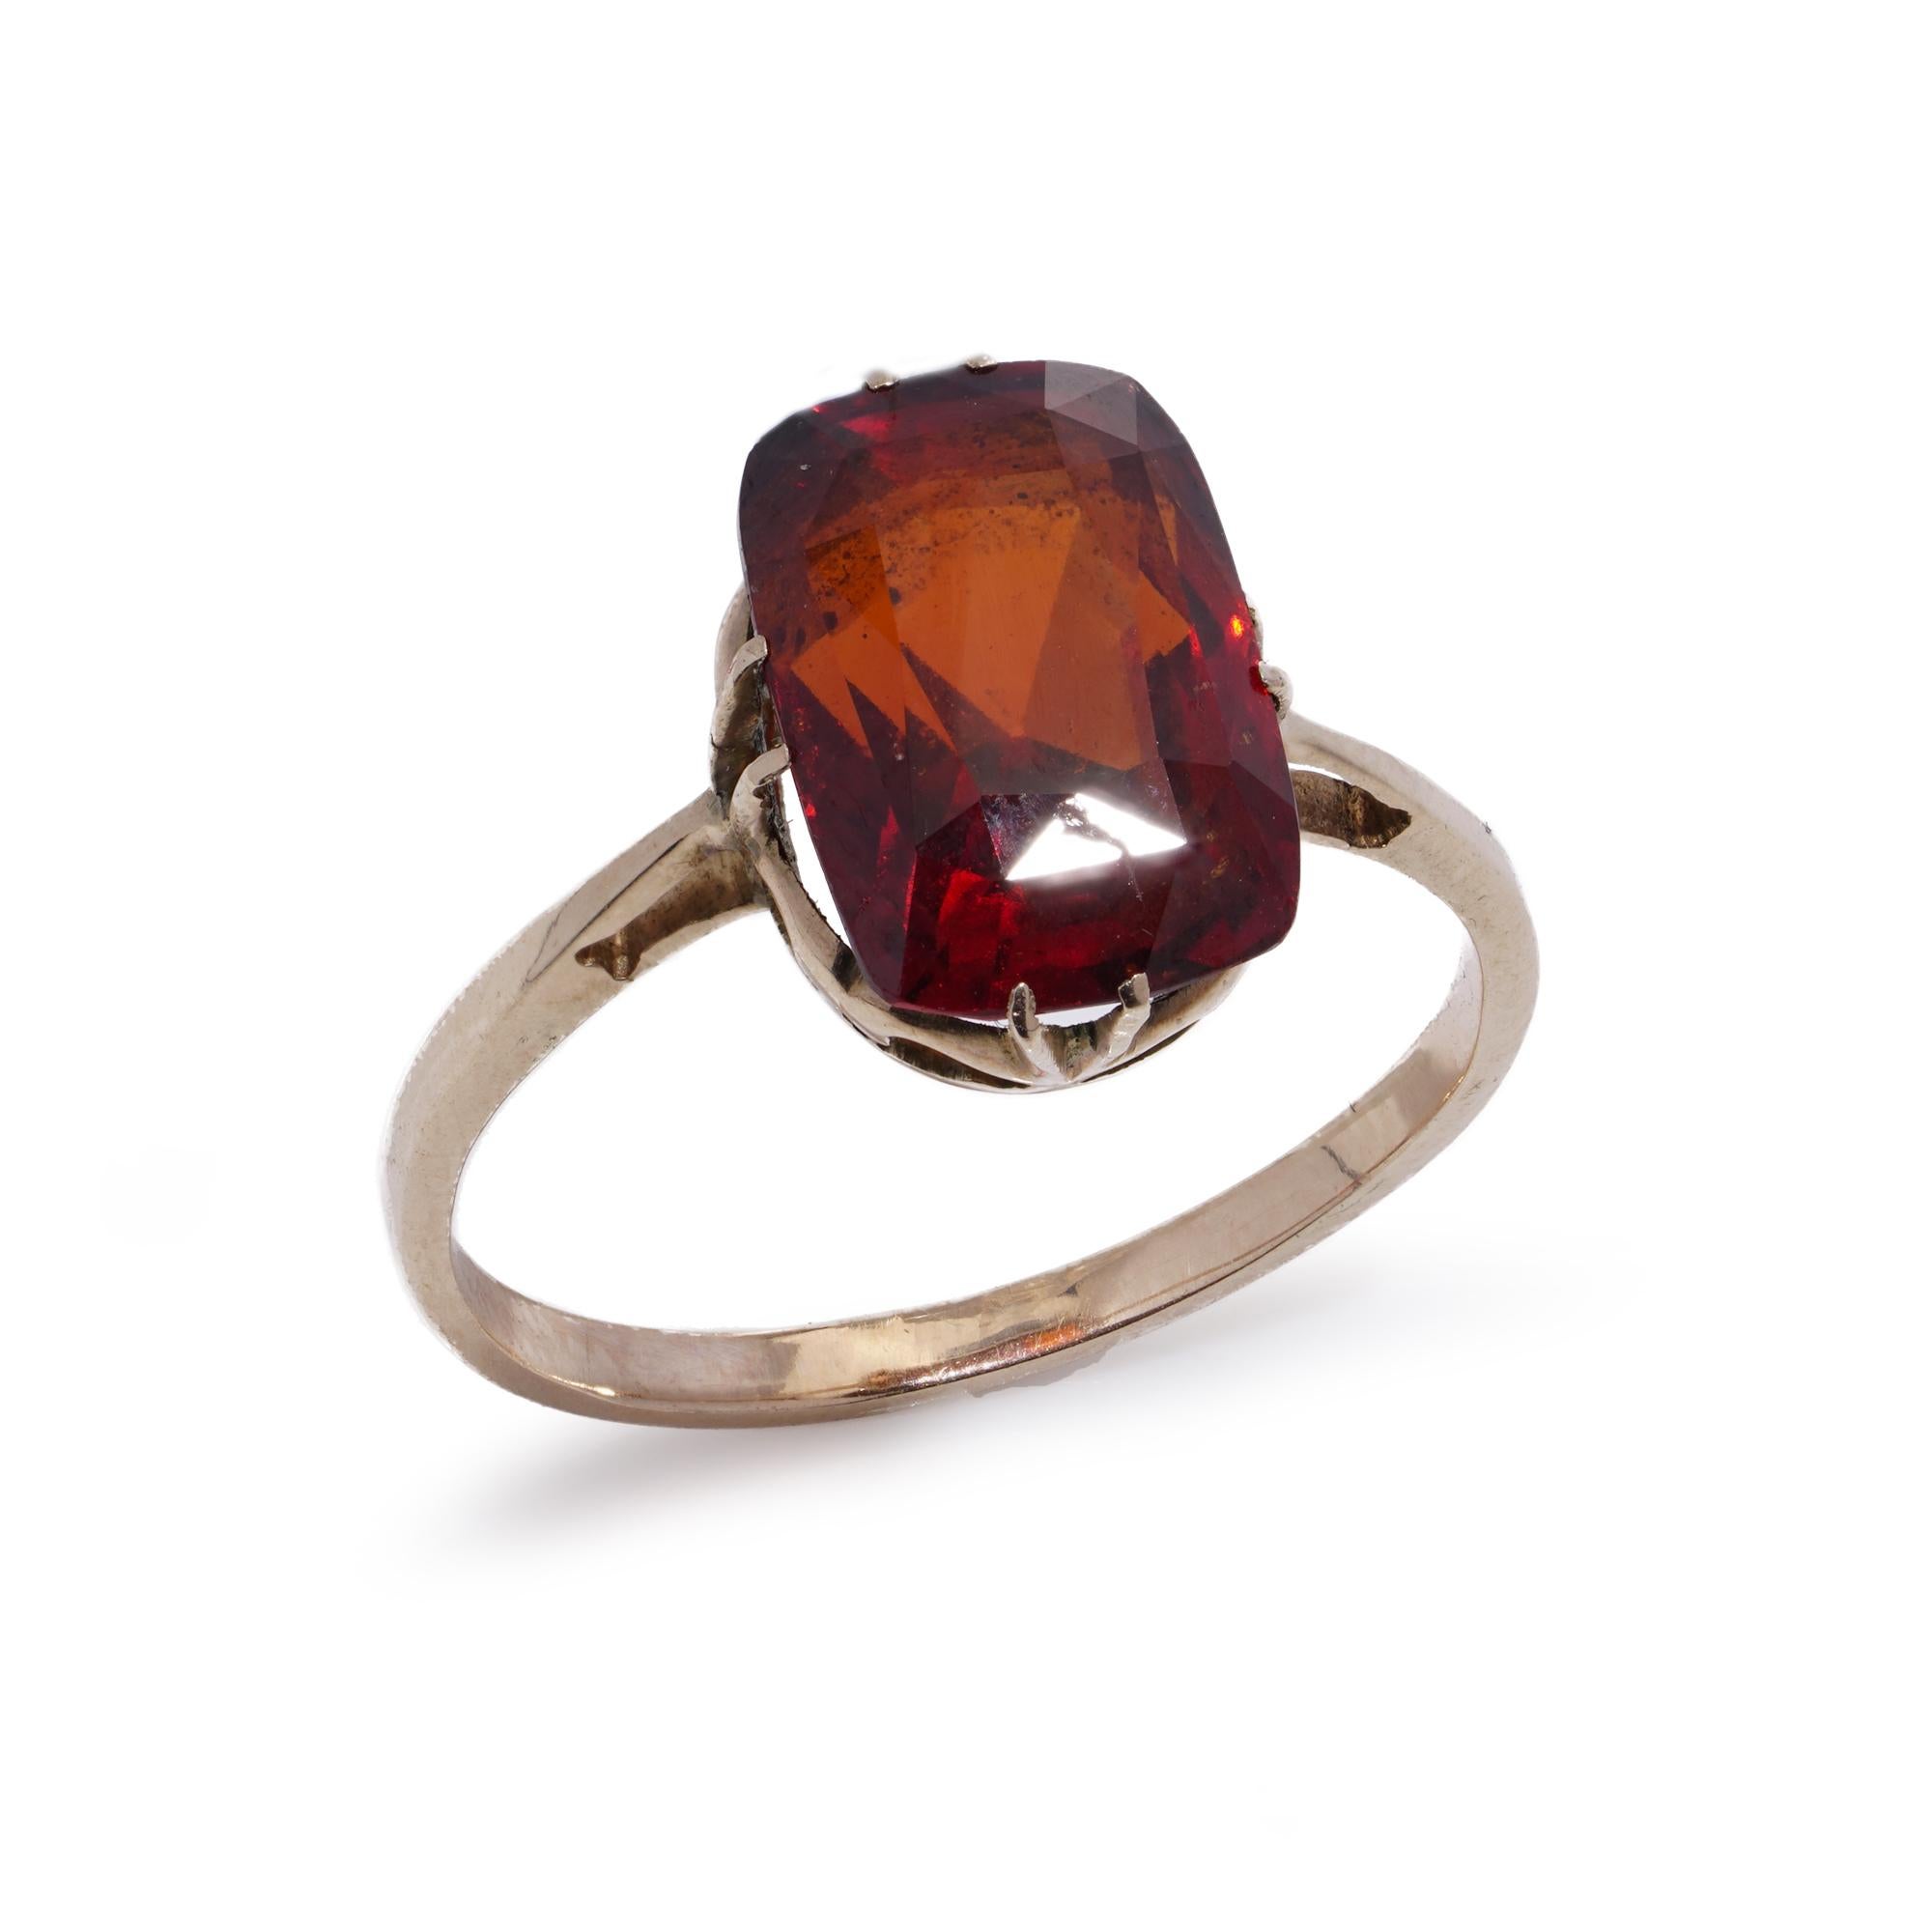 Antique Victorian 9kt gold 3.00 cts. orange citrine solitaire ring In Good Condition For Sale In Braintree, GB